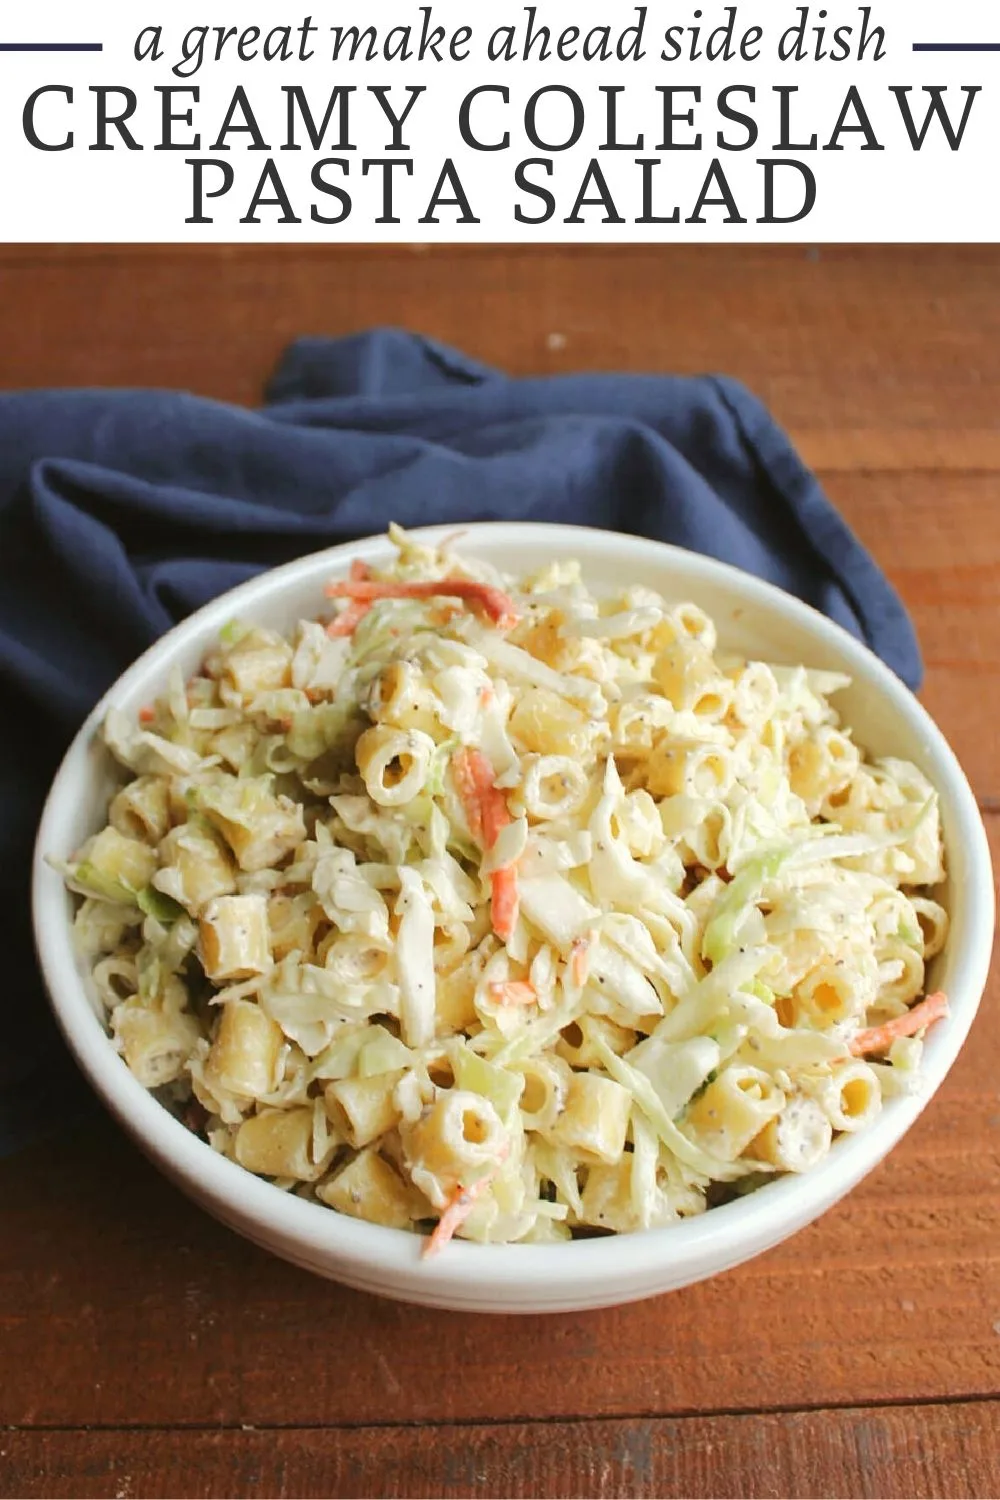 Creamy coleslaw pasta salad is full of amazing texture, and flavor! It's the perfect mix of two of our favorite salads at BBQs and family gatherings.